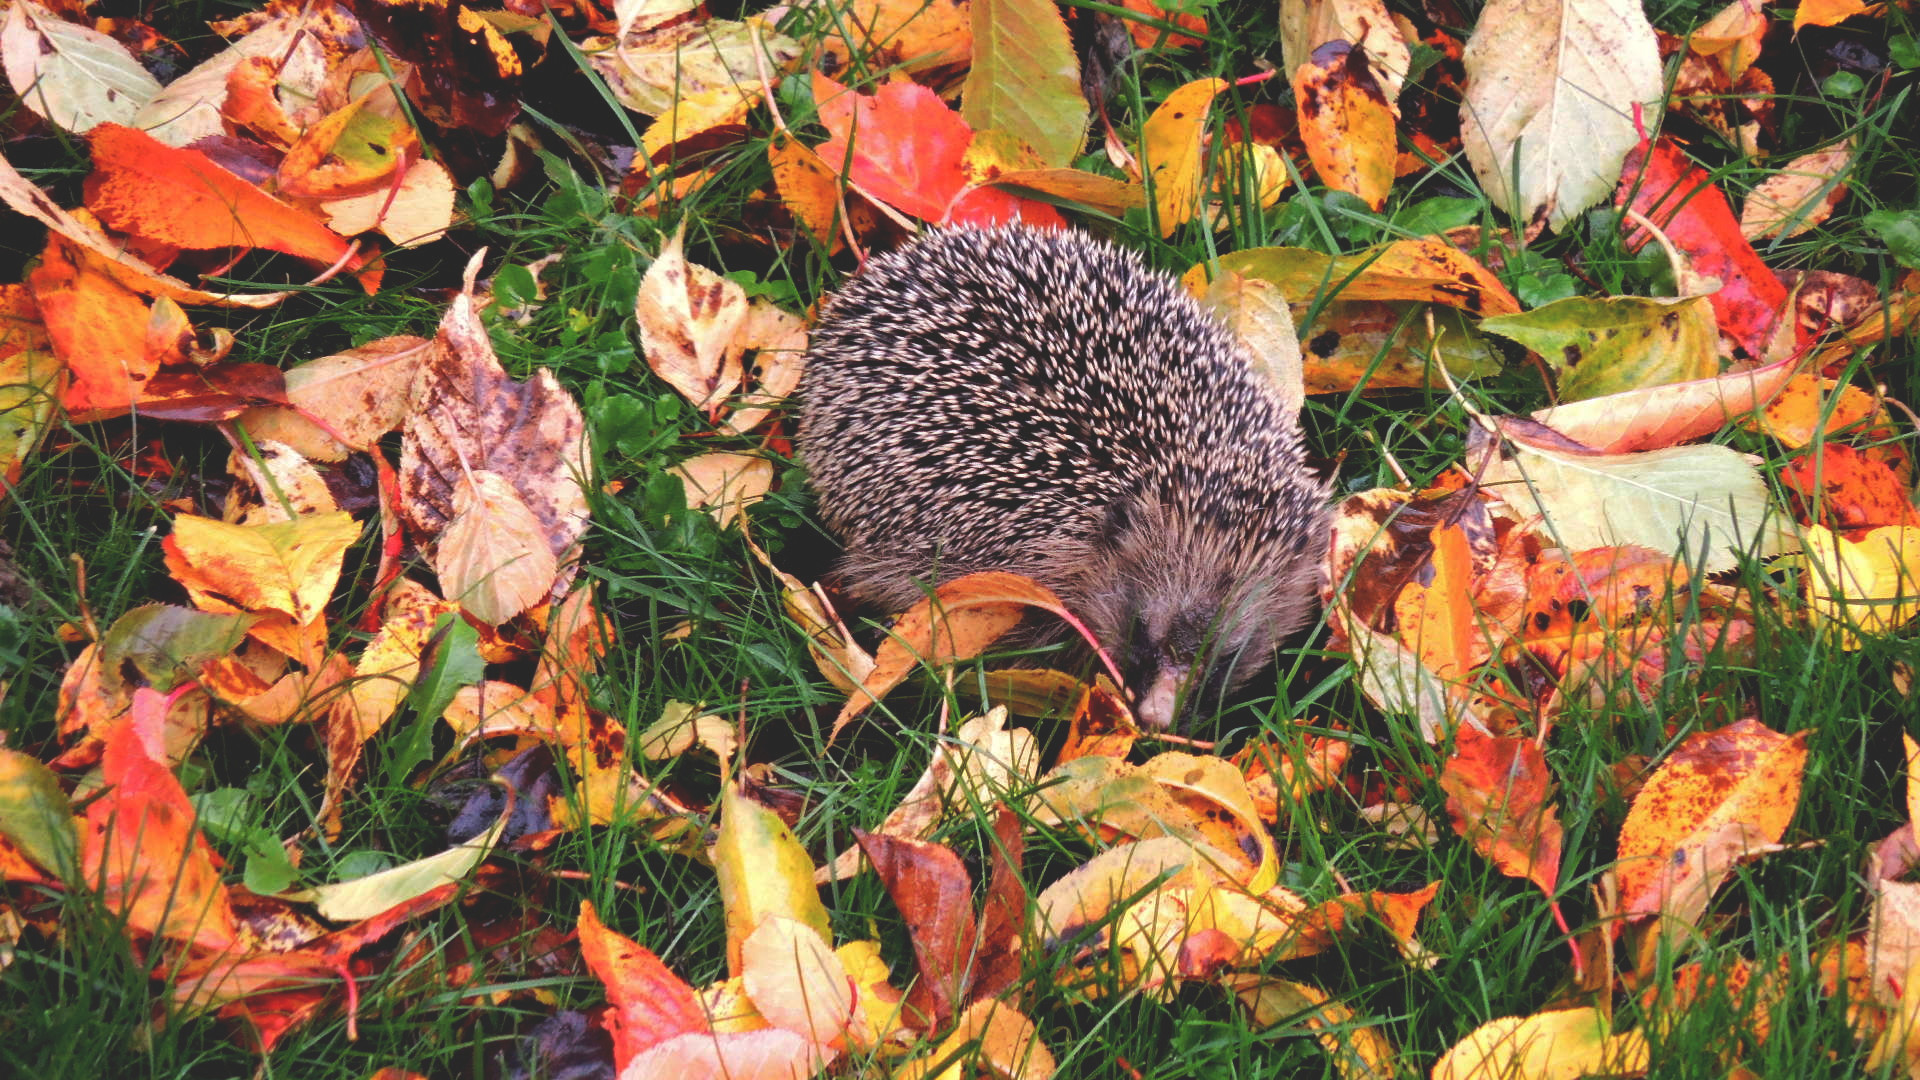 General 1920x1080 hedgehog leaves grass nature outdoors animals fall